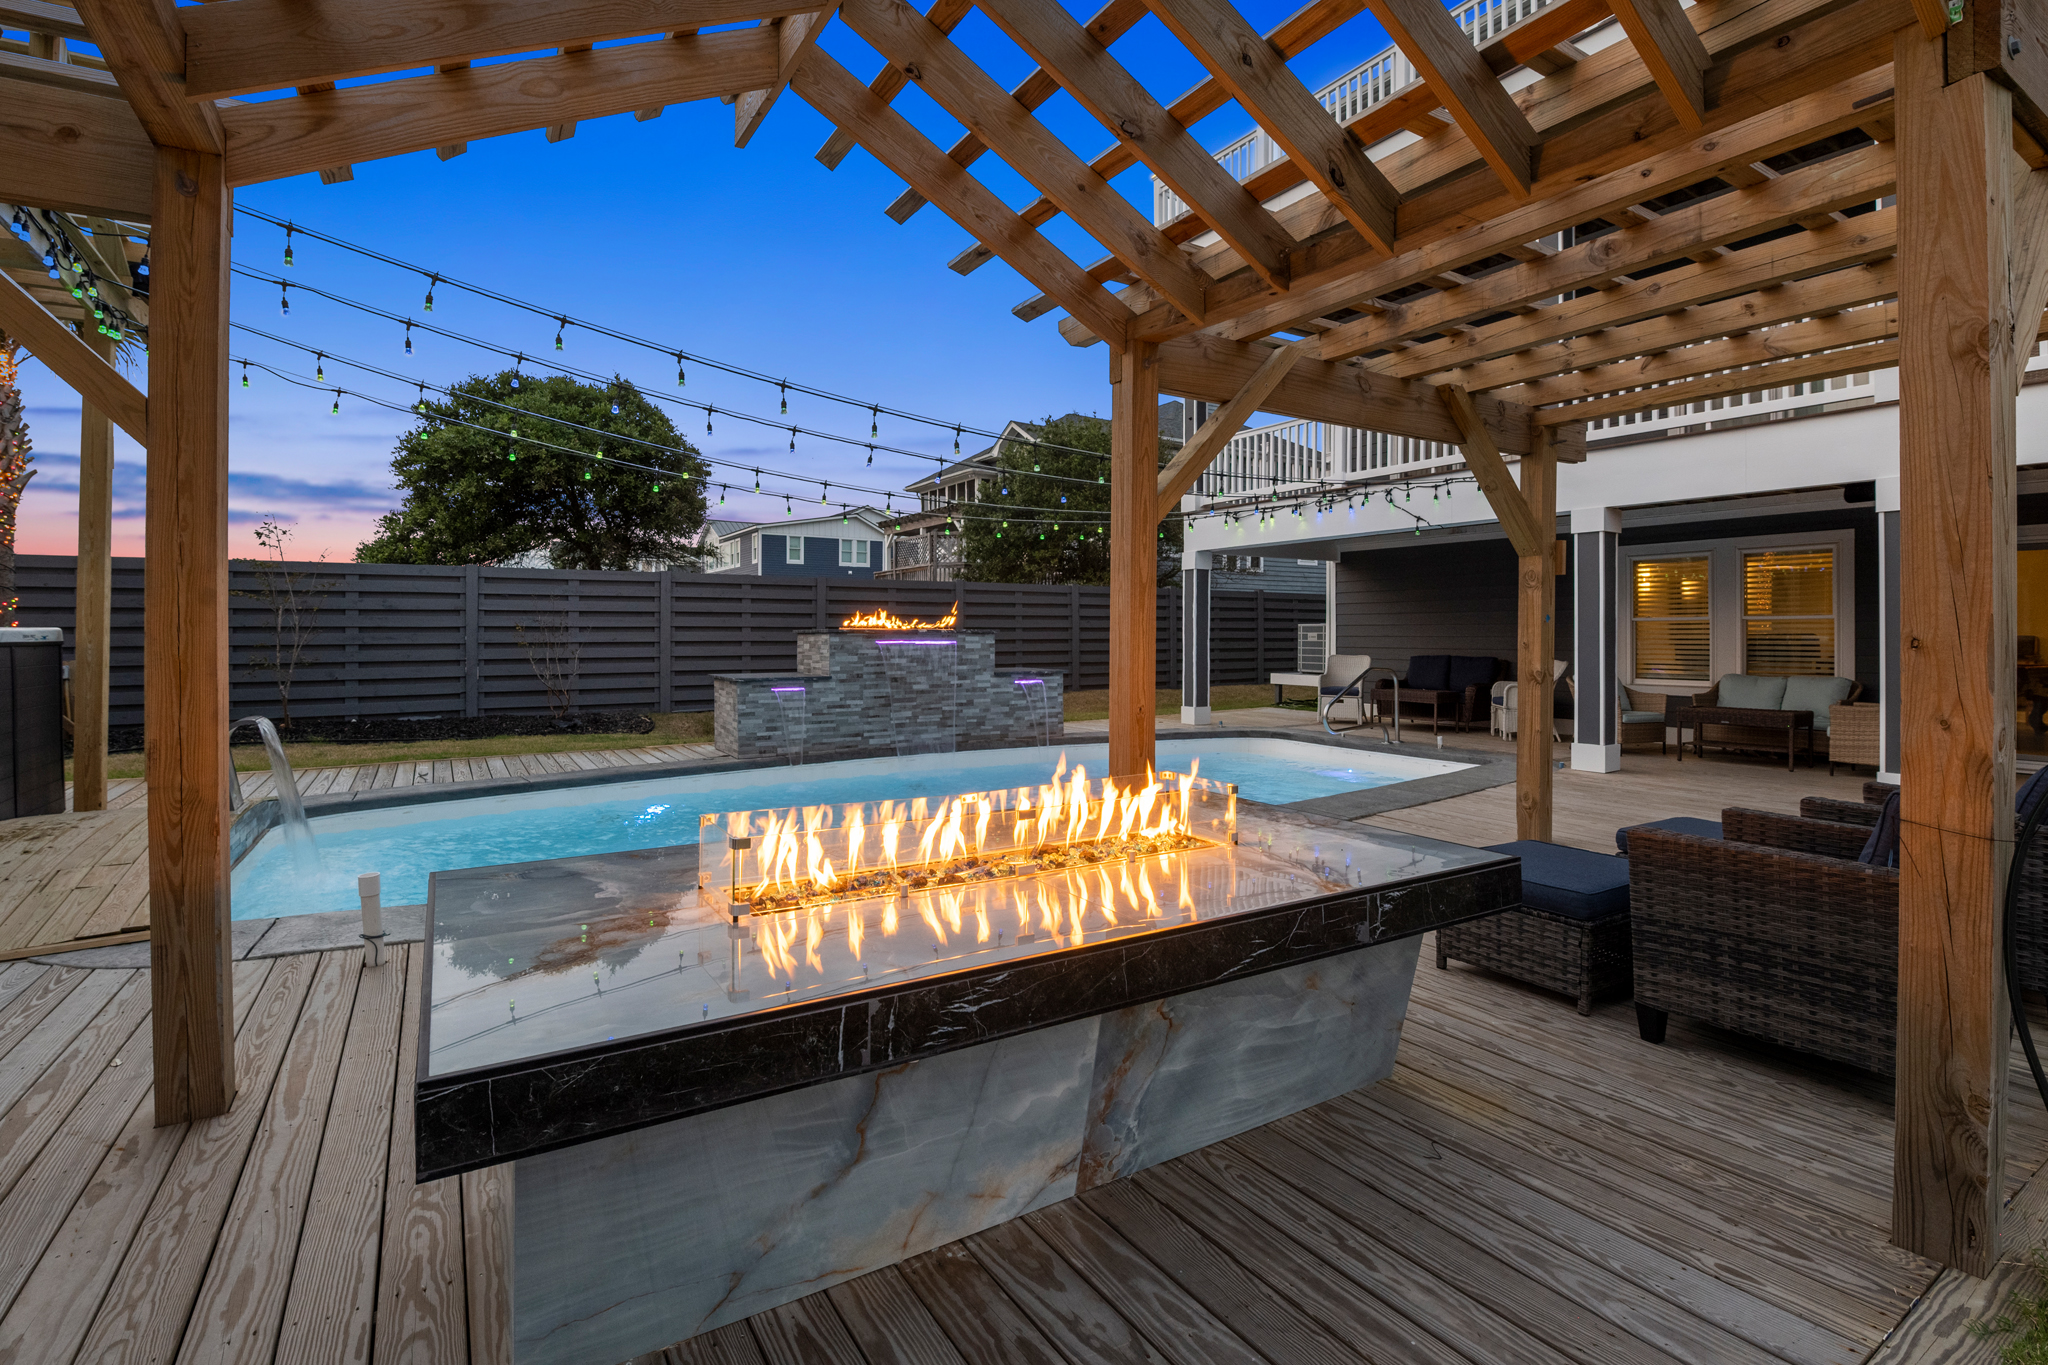 WH786: The OBX One | Backyard Event Space w/ Private Pool